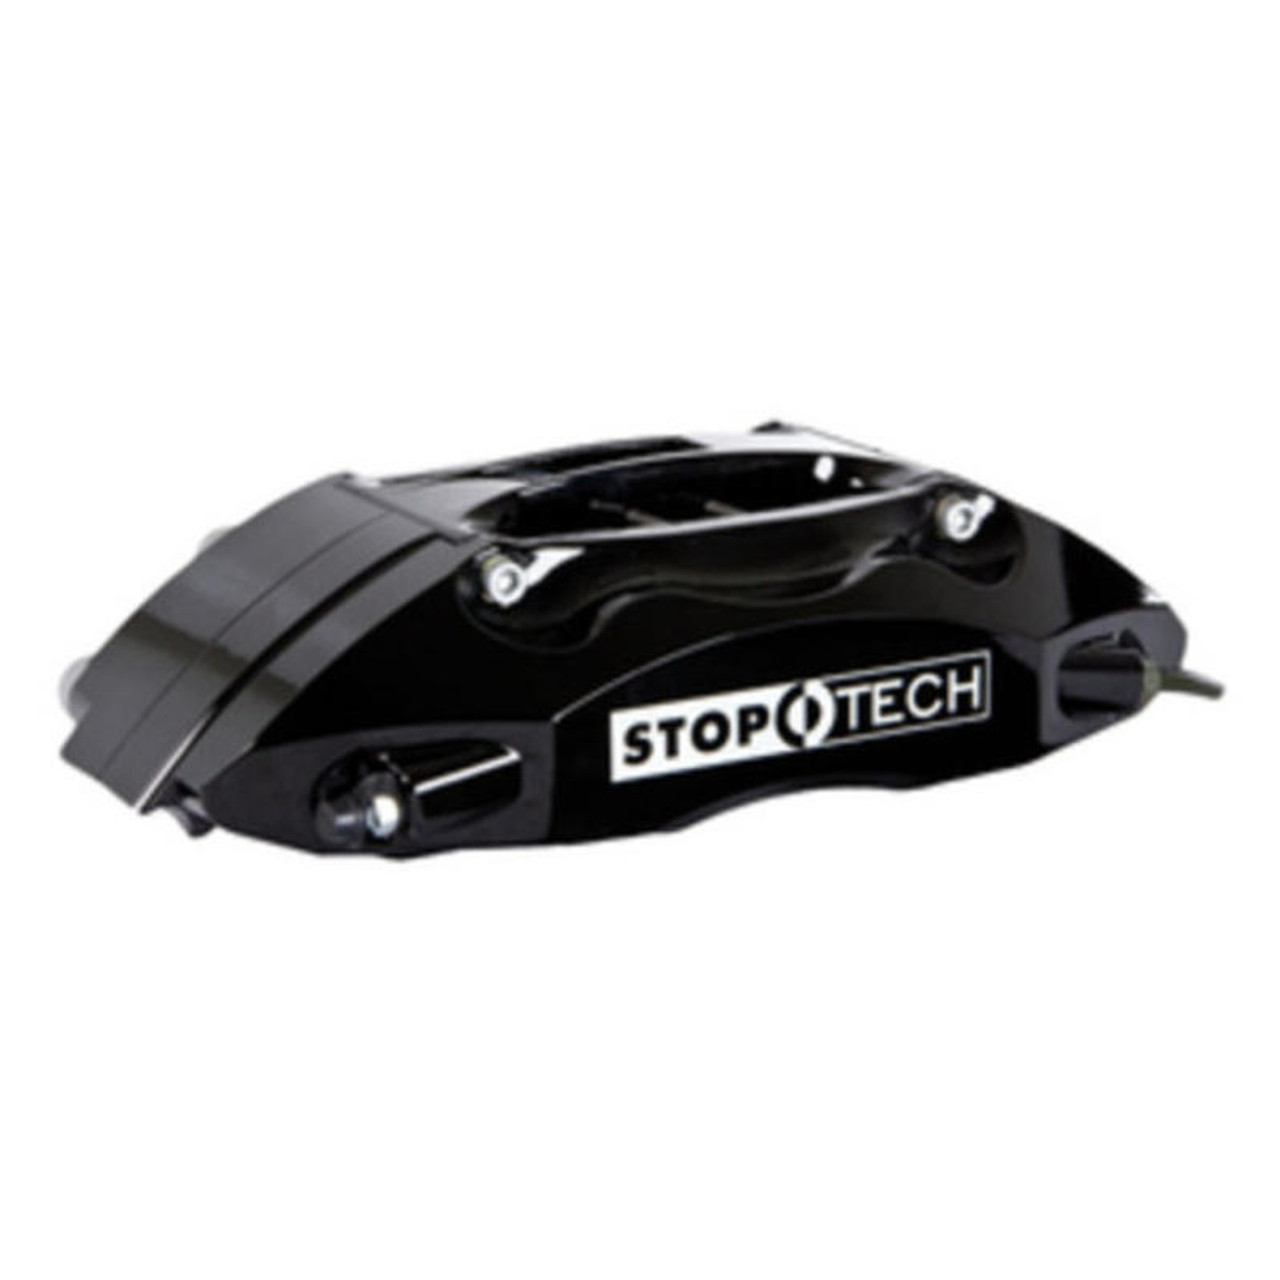 Stoptech StopTech 2004 VW Golf 3.2L R32 Front BBK w/ Zinc Slotted Rotors Black Calipers - 83.890.4700.53